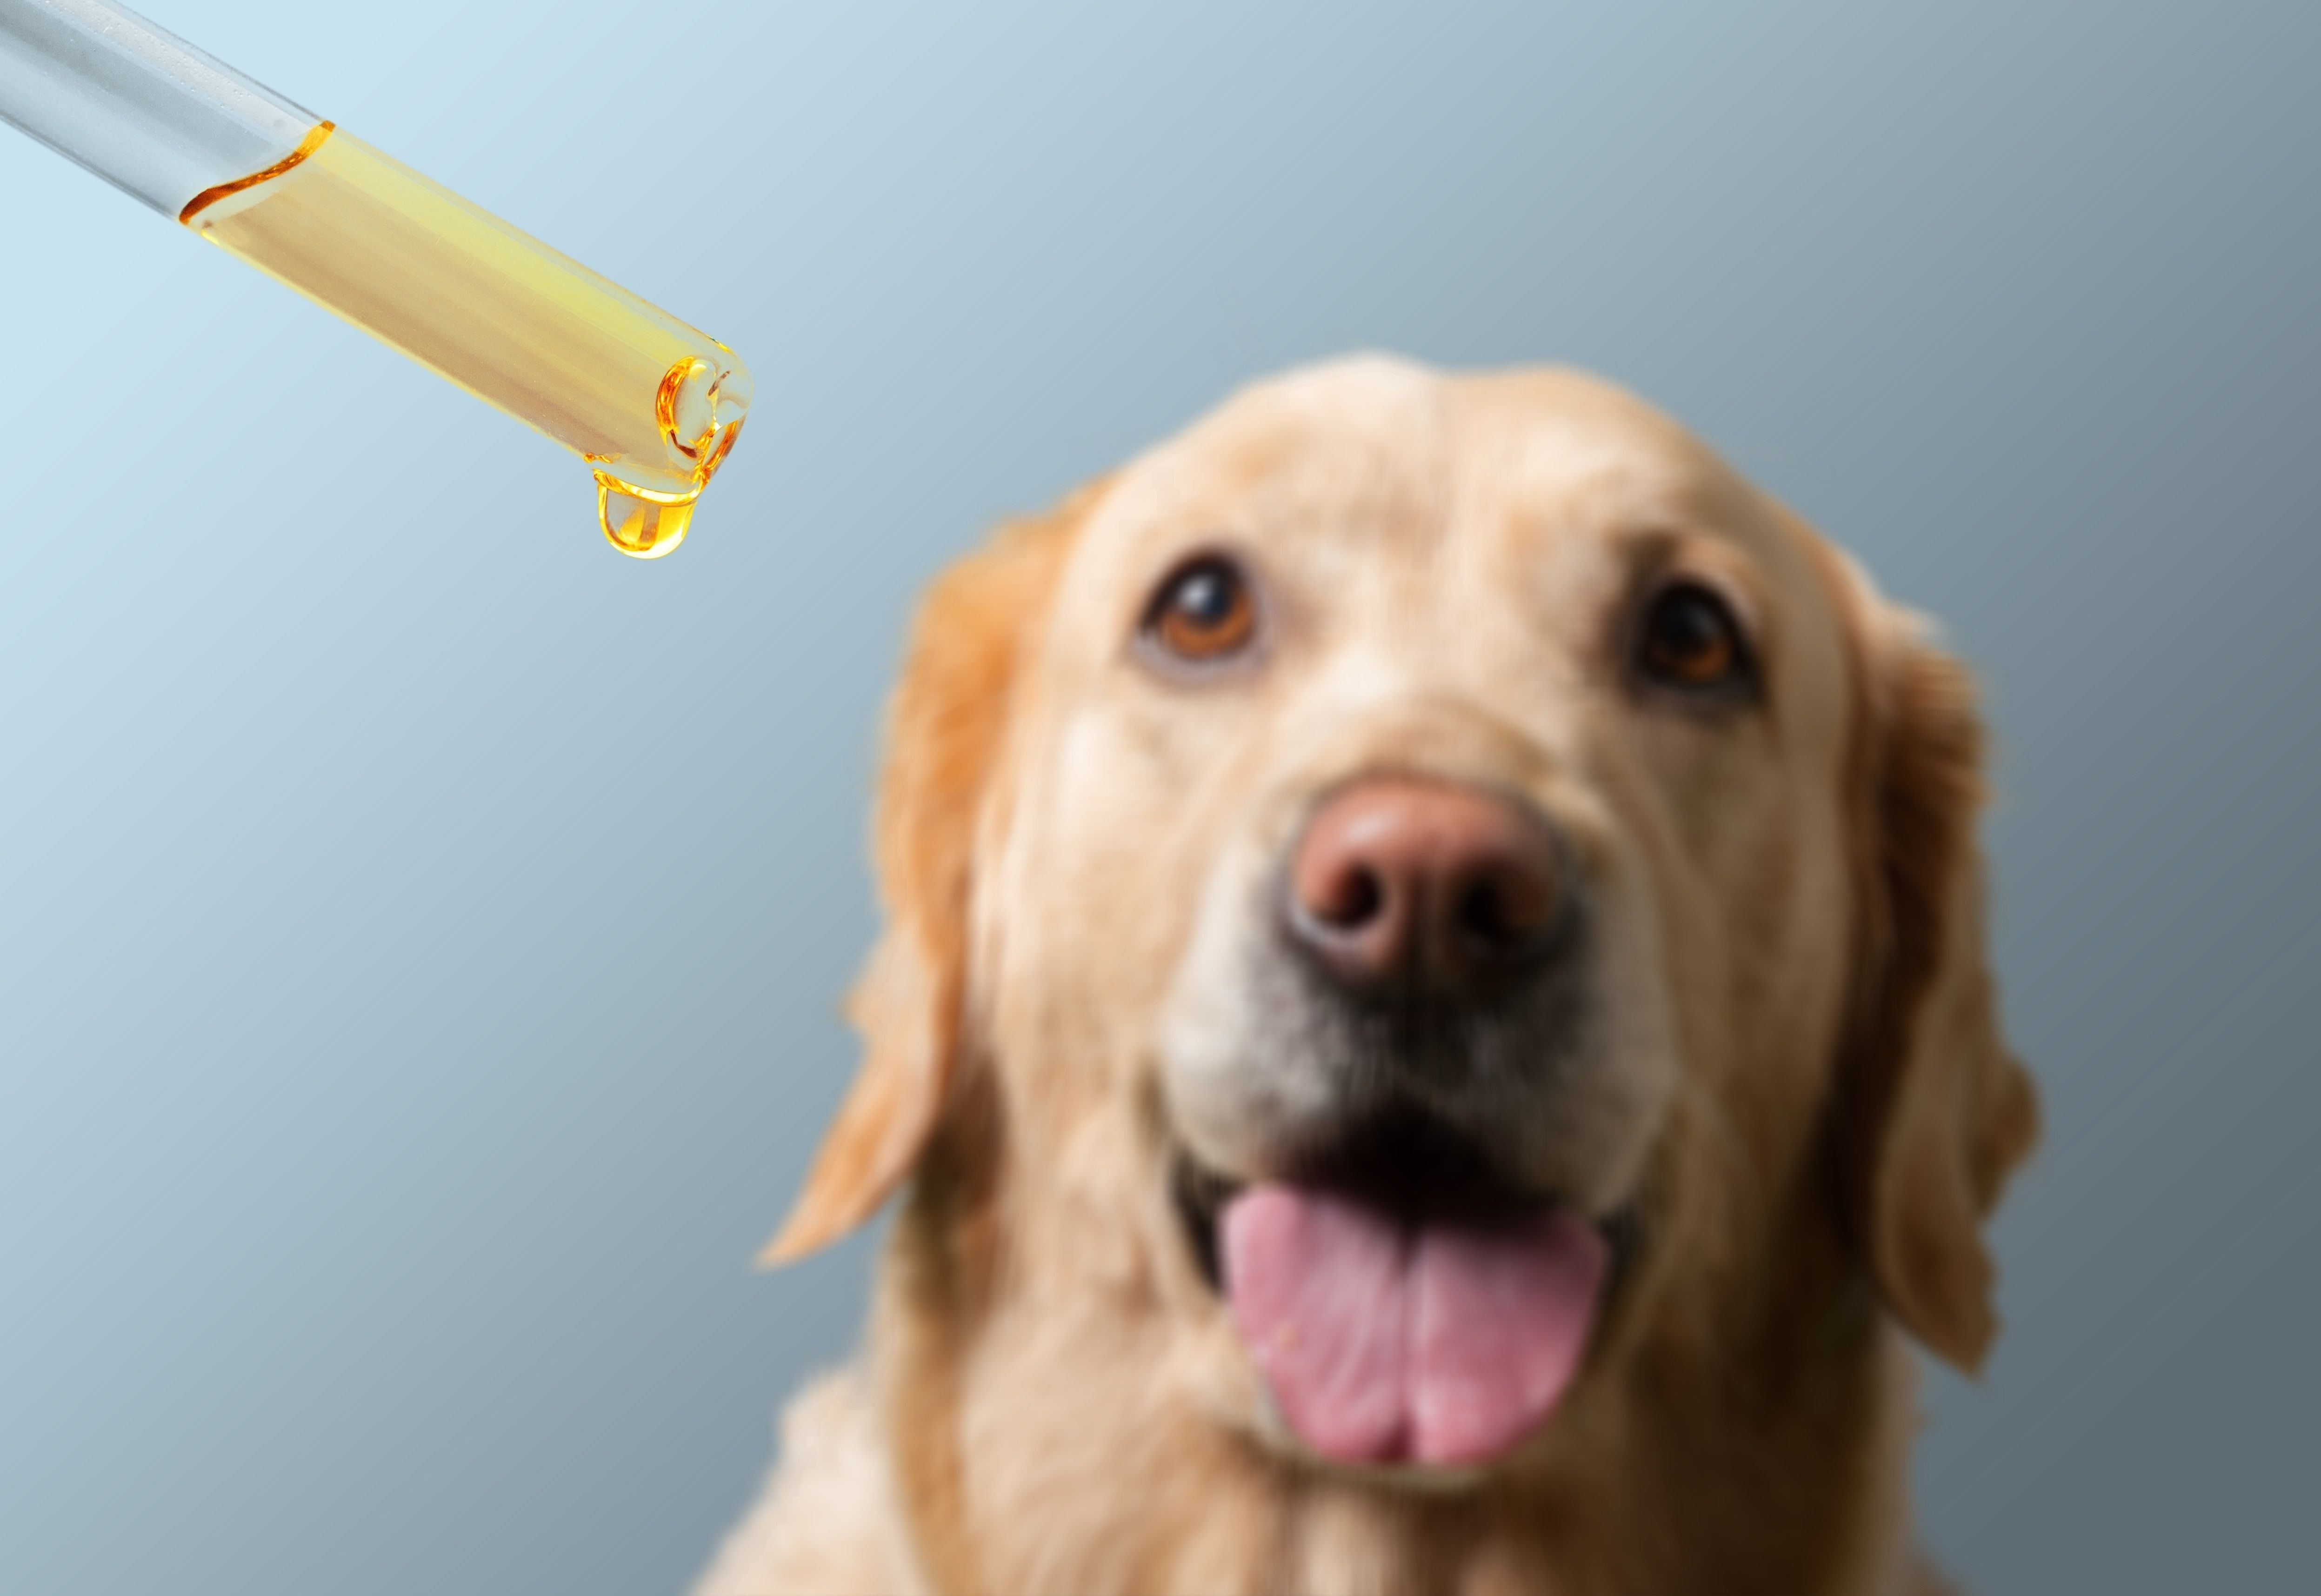 what cbd does for dog